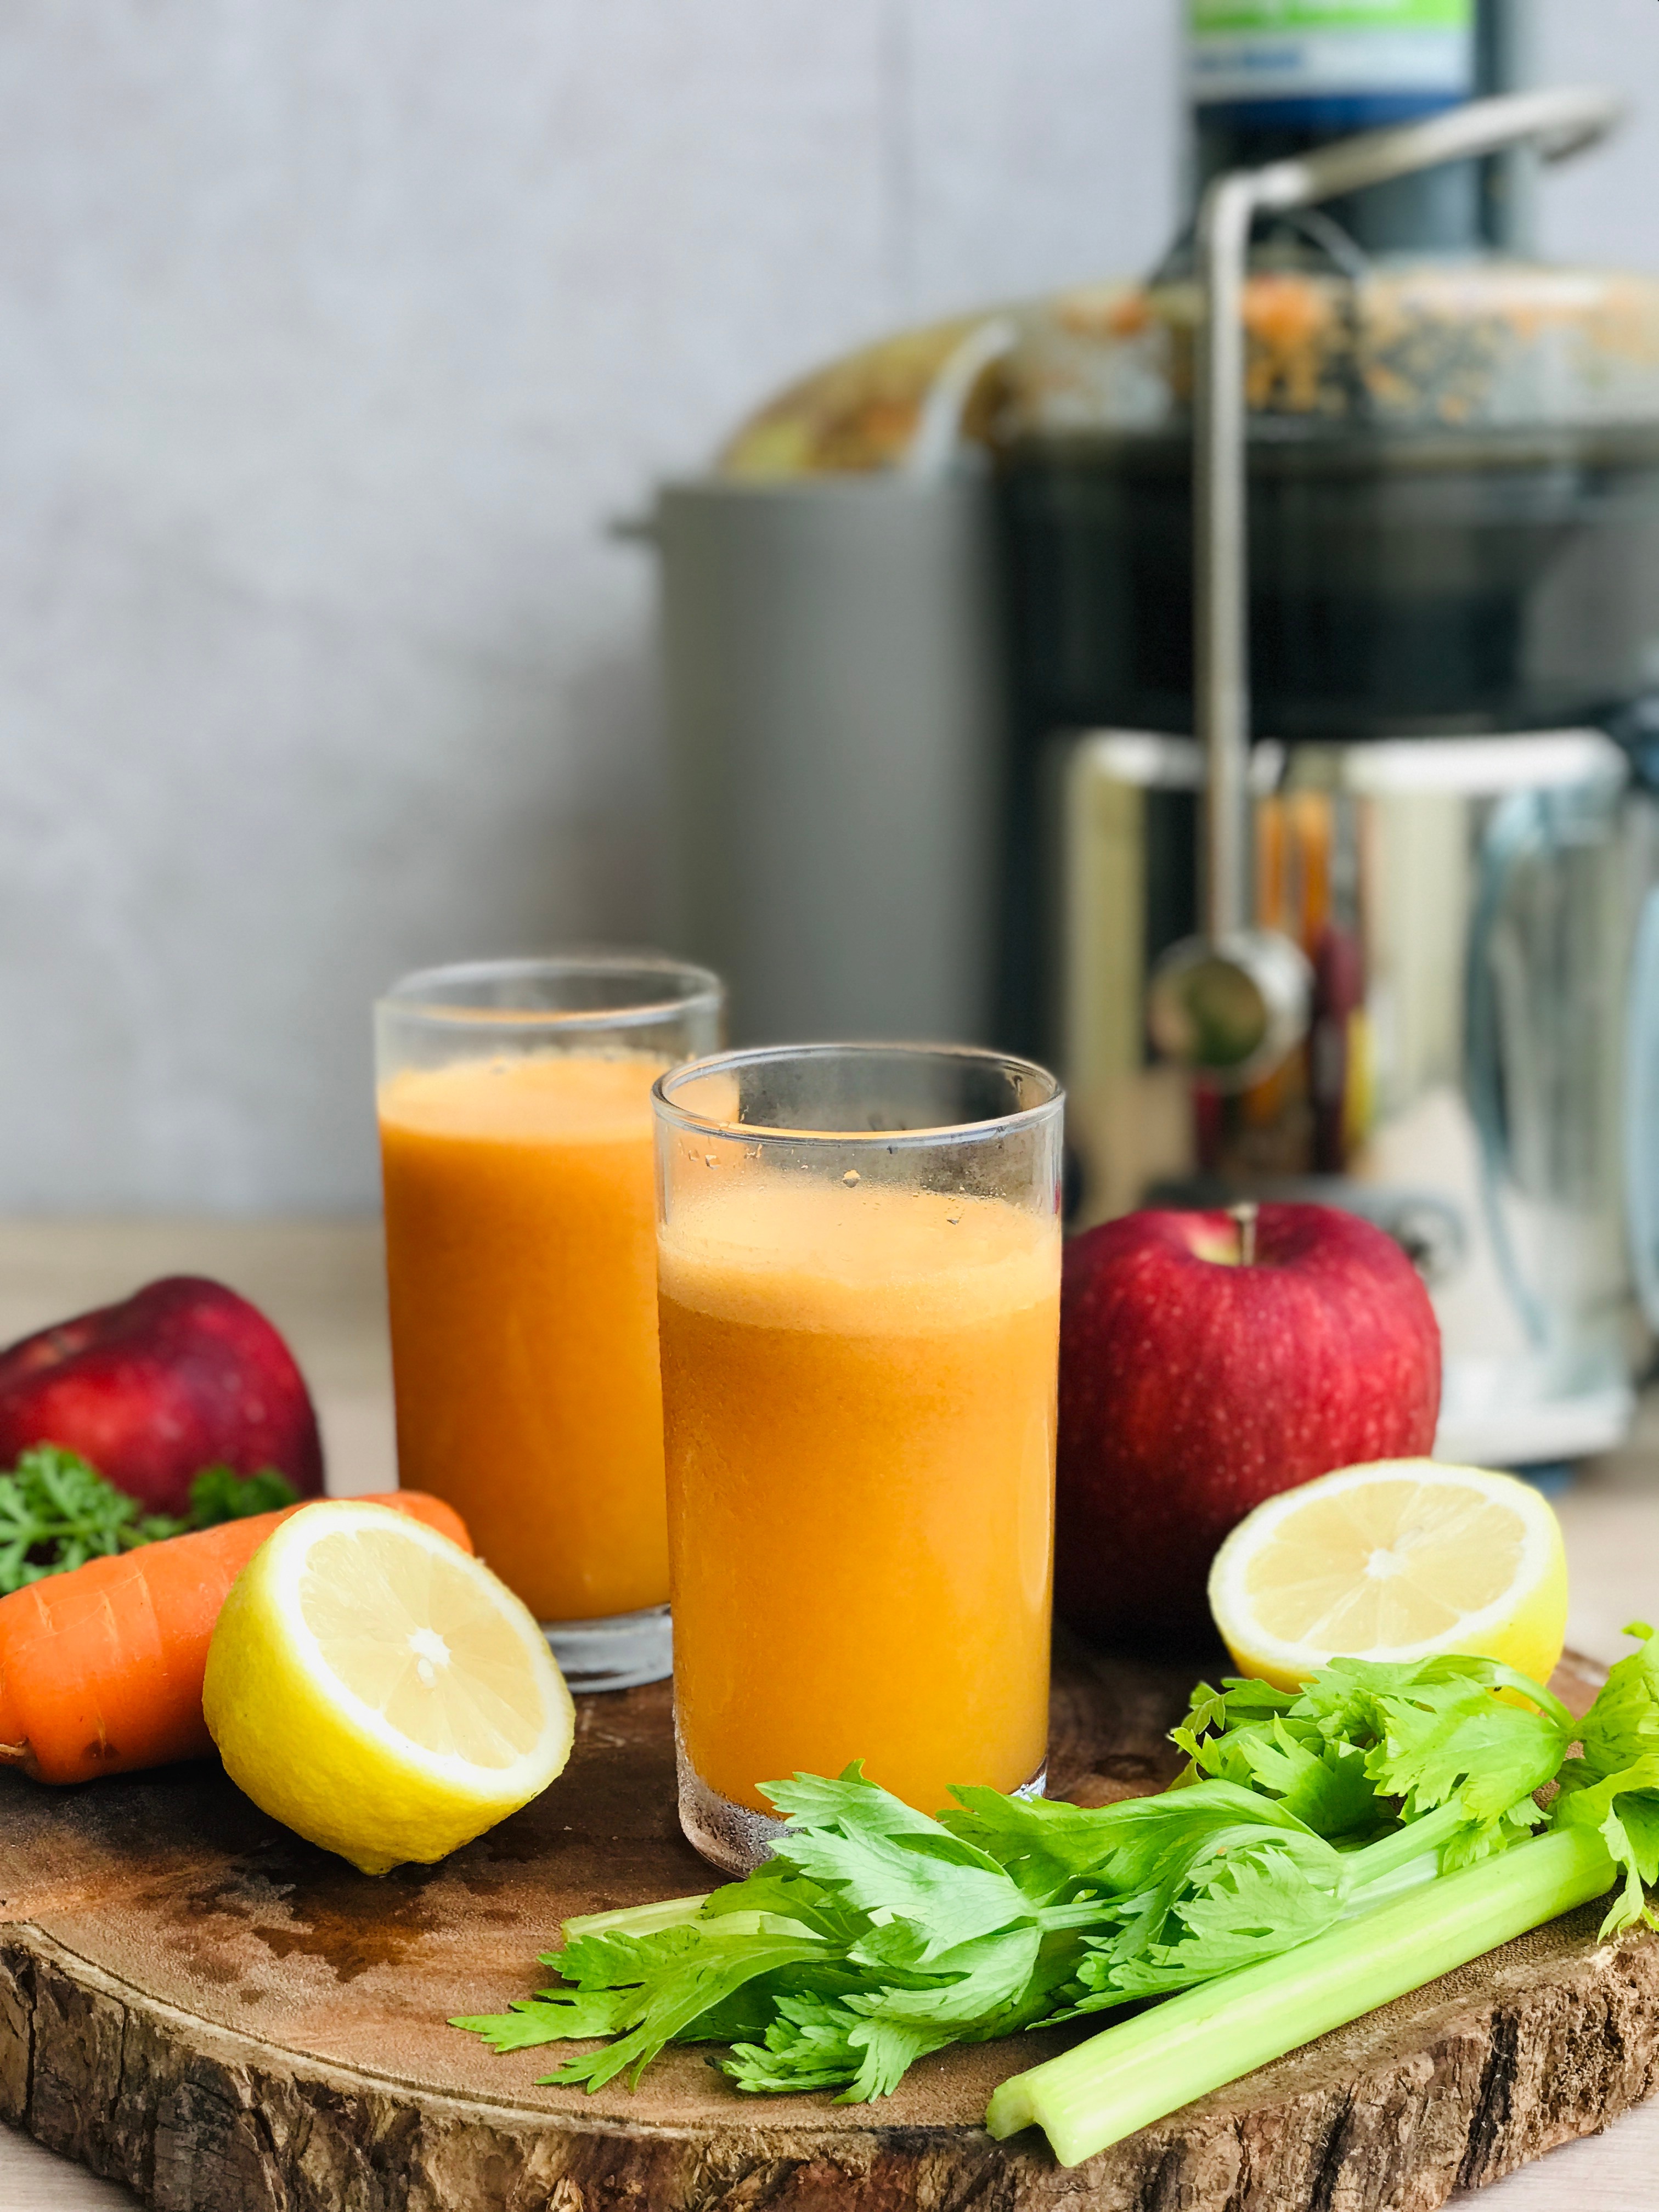 Hot for the Summer? No Thanks, Stay Chill With These Juice Recipes Instead